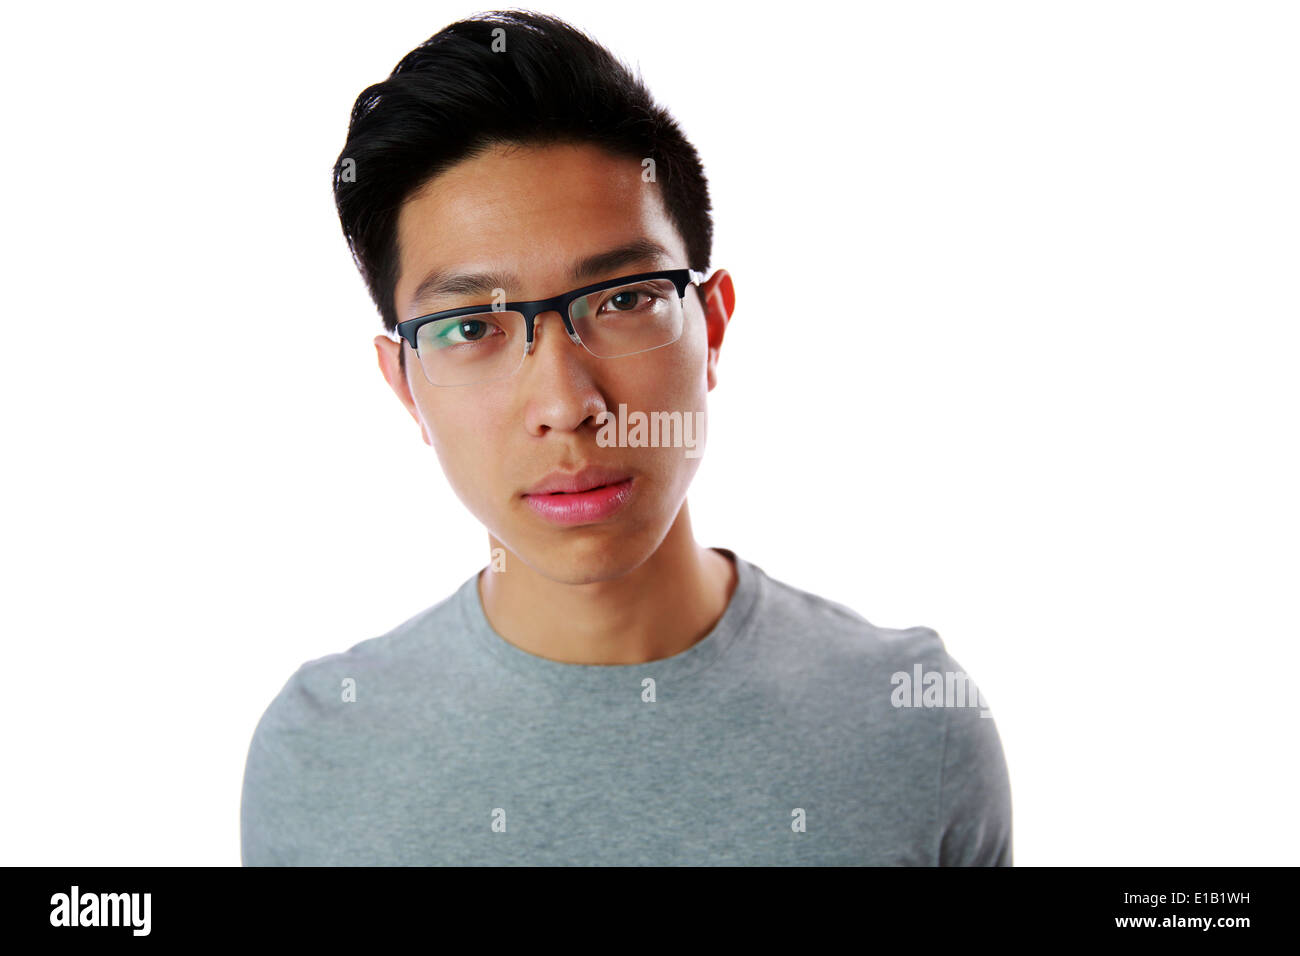 Portrait of a young pensive asian man over white background Stock Photo